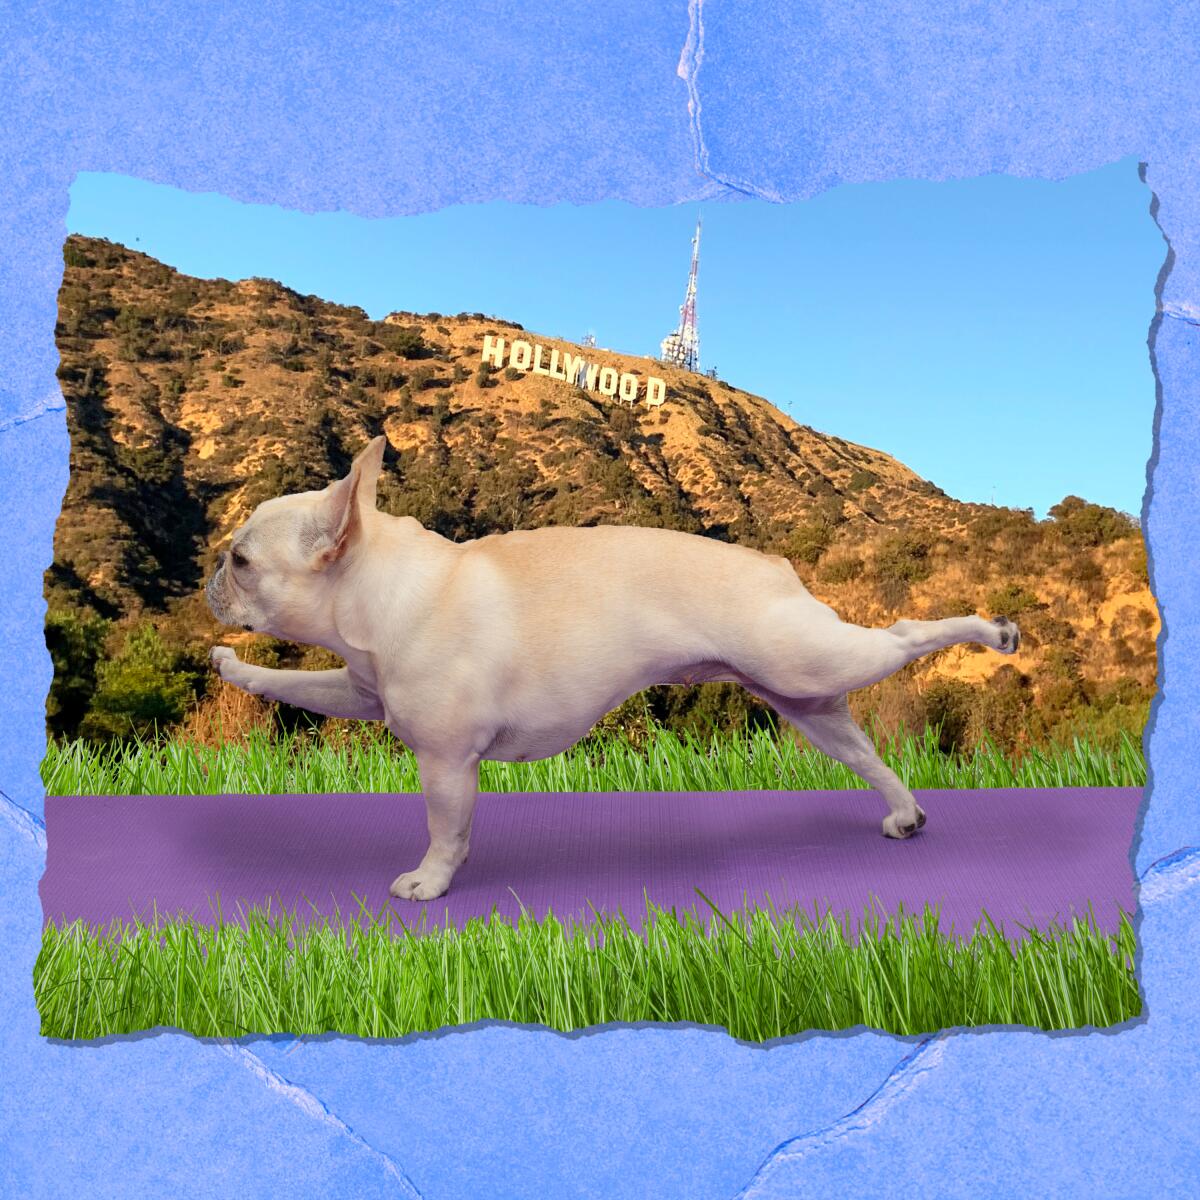 Illustration of a small dog on a yoga mat. In the background is the Hollywood sign.